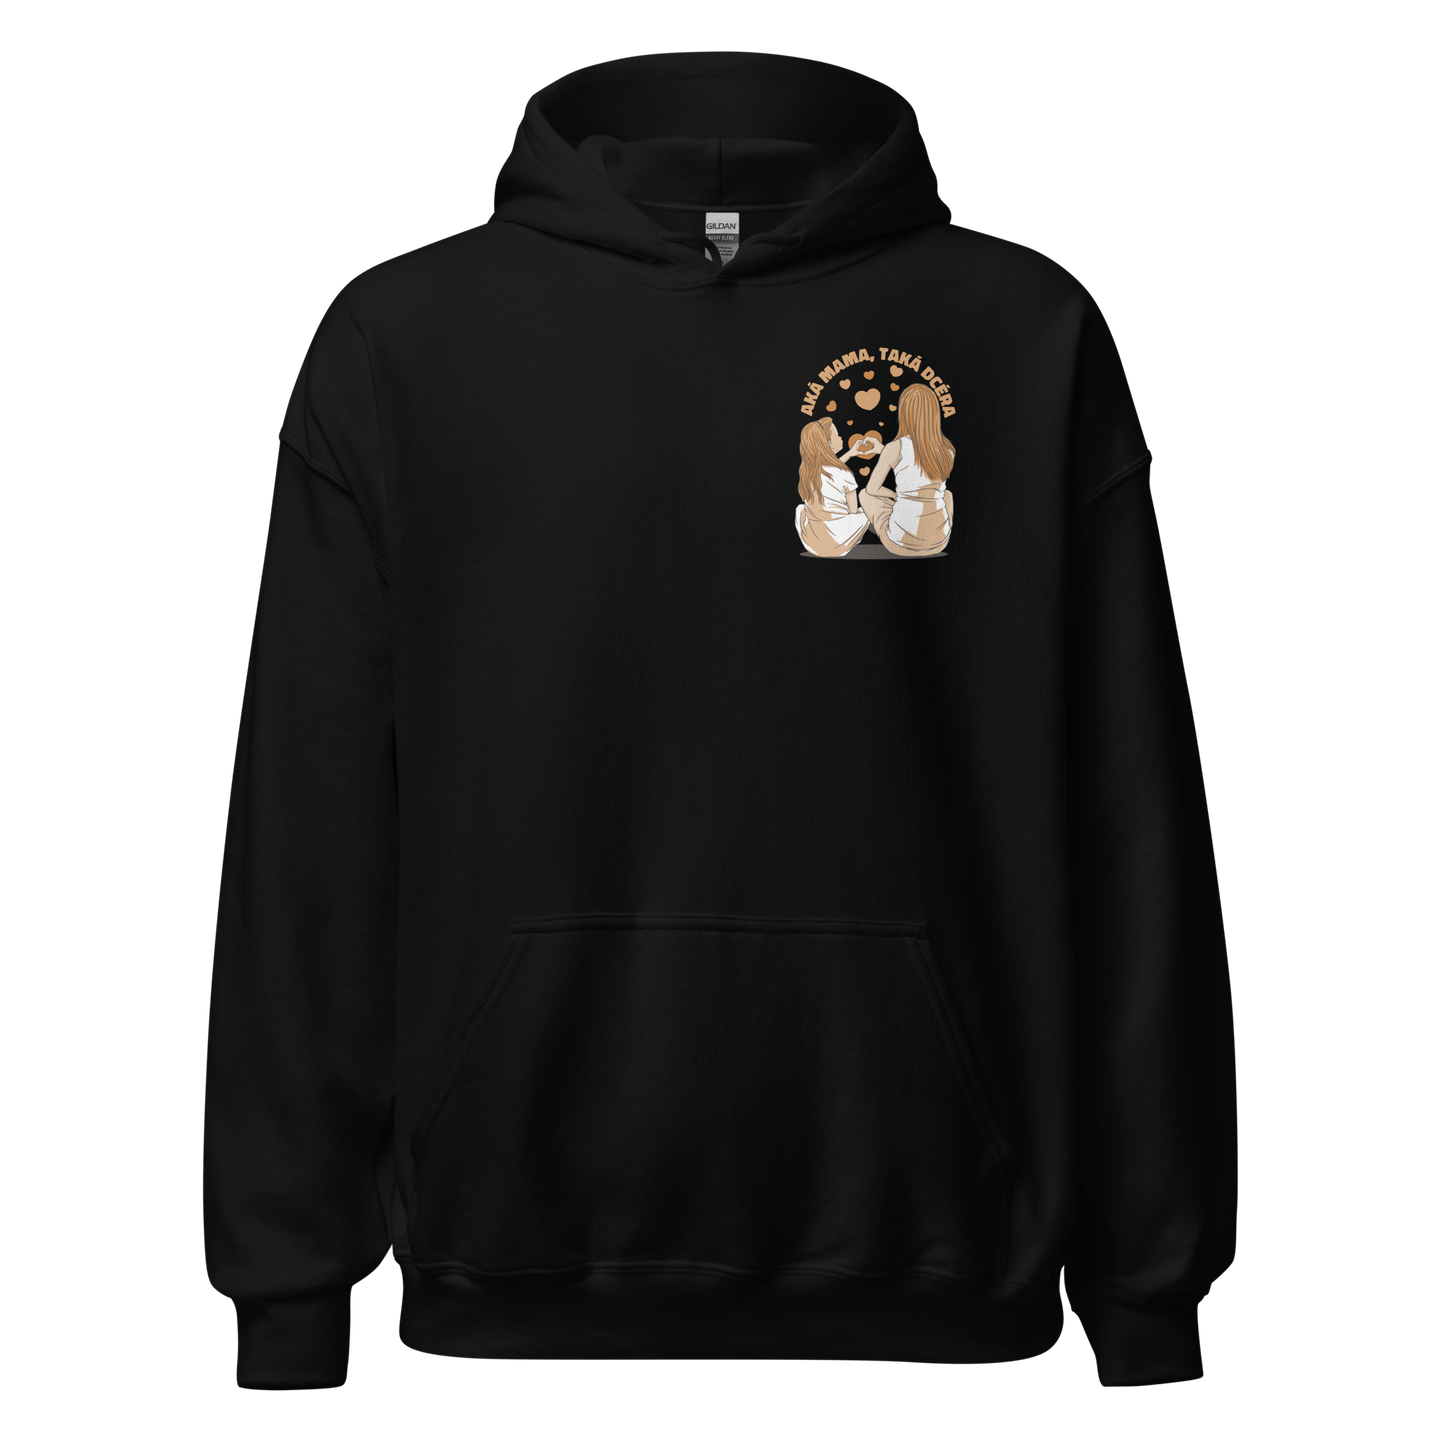 Mother and daughter family | Unisex Hoodie - F&B